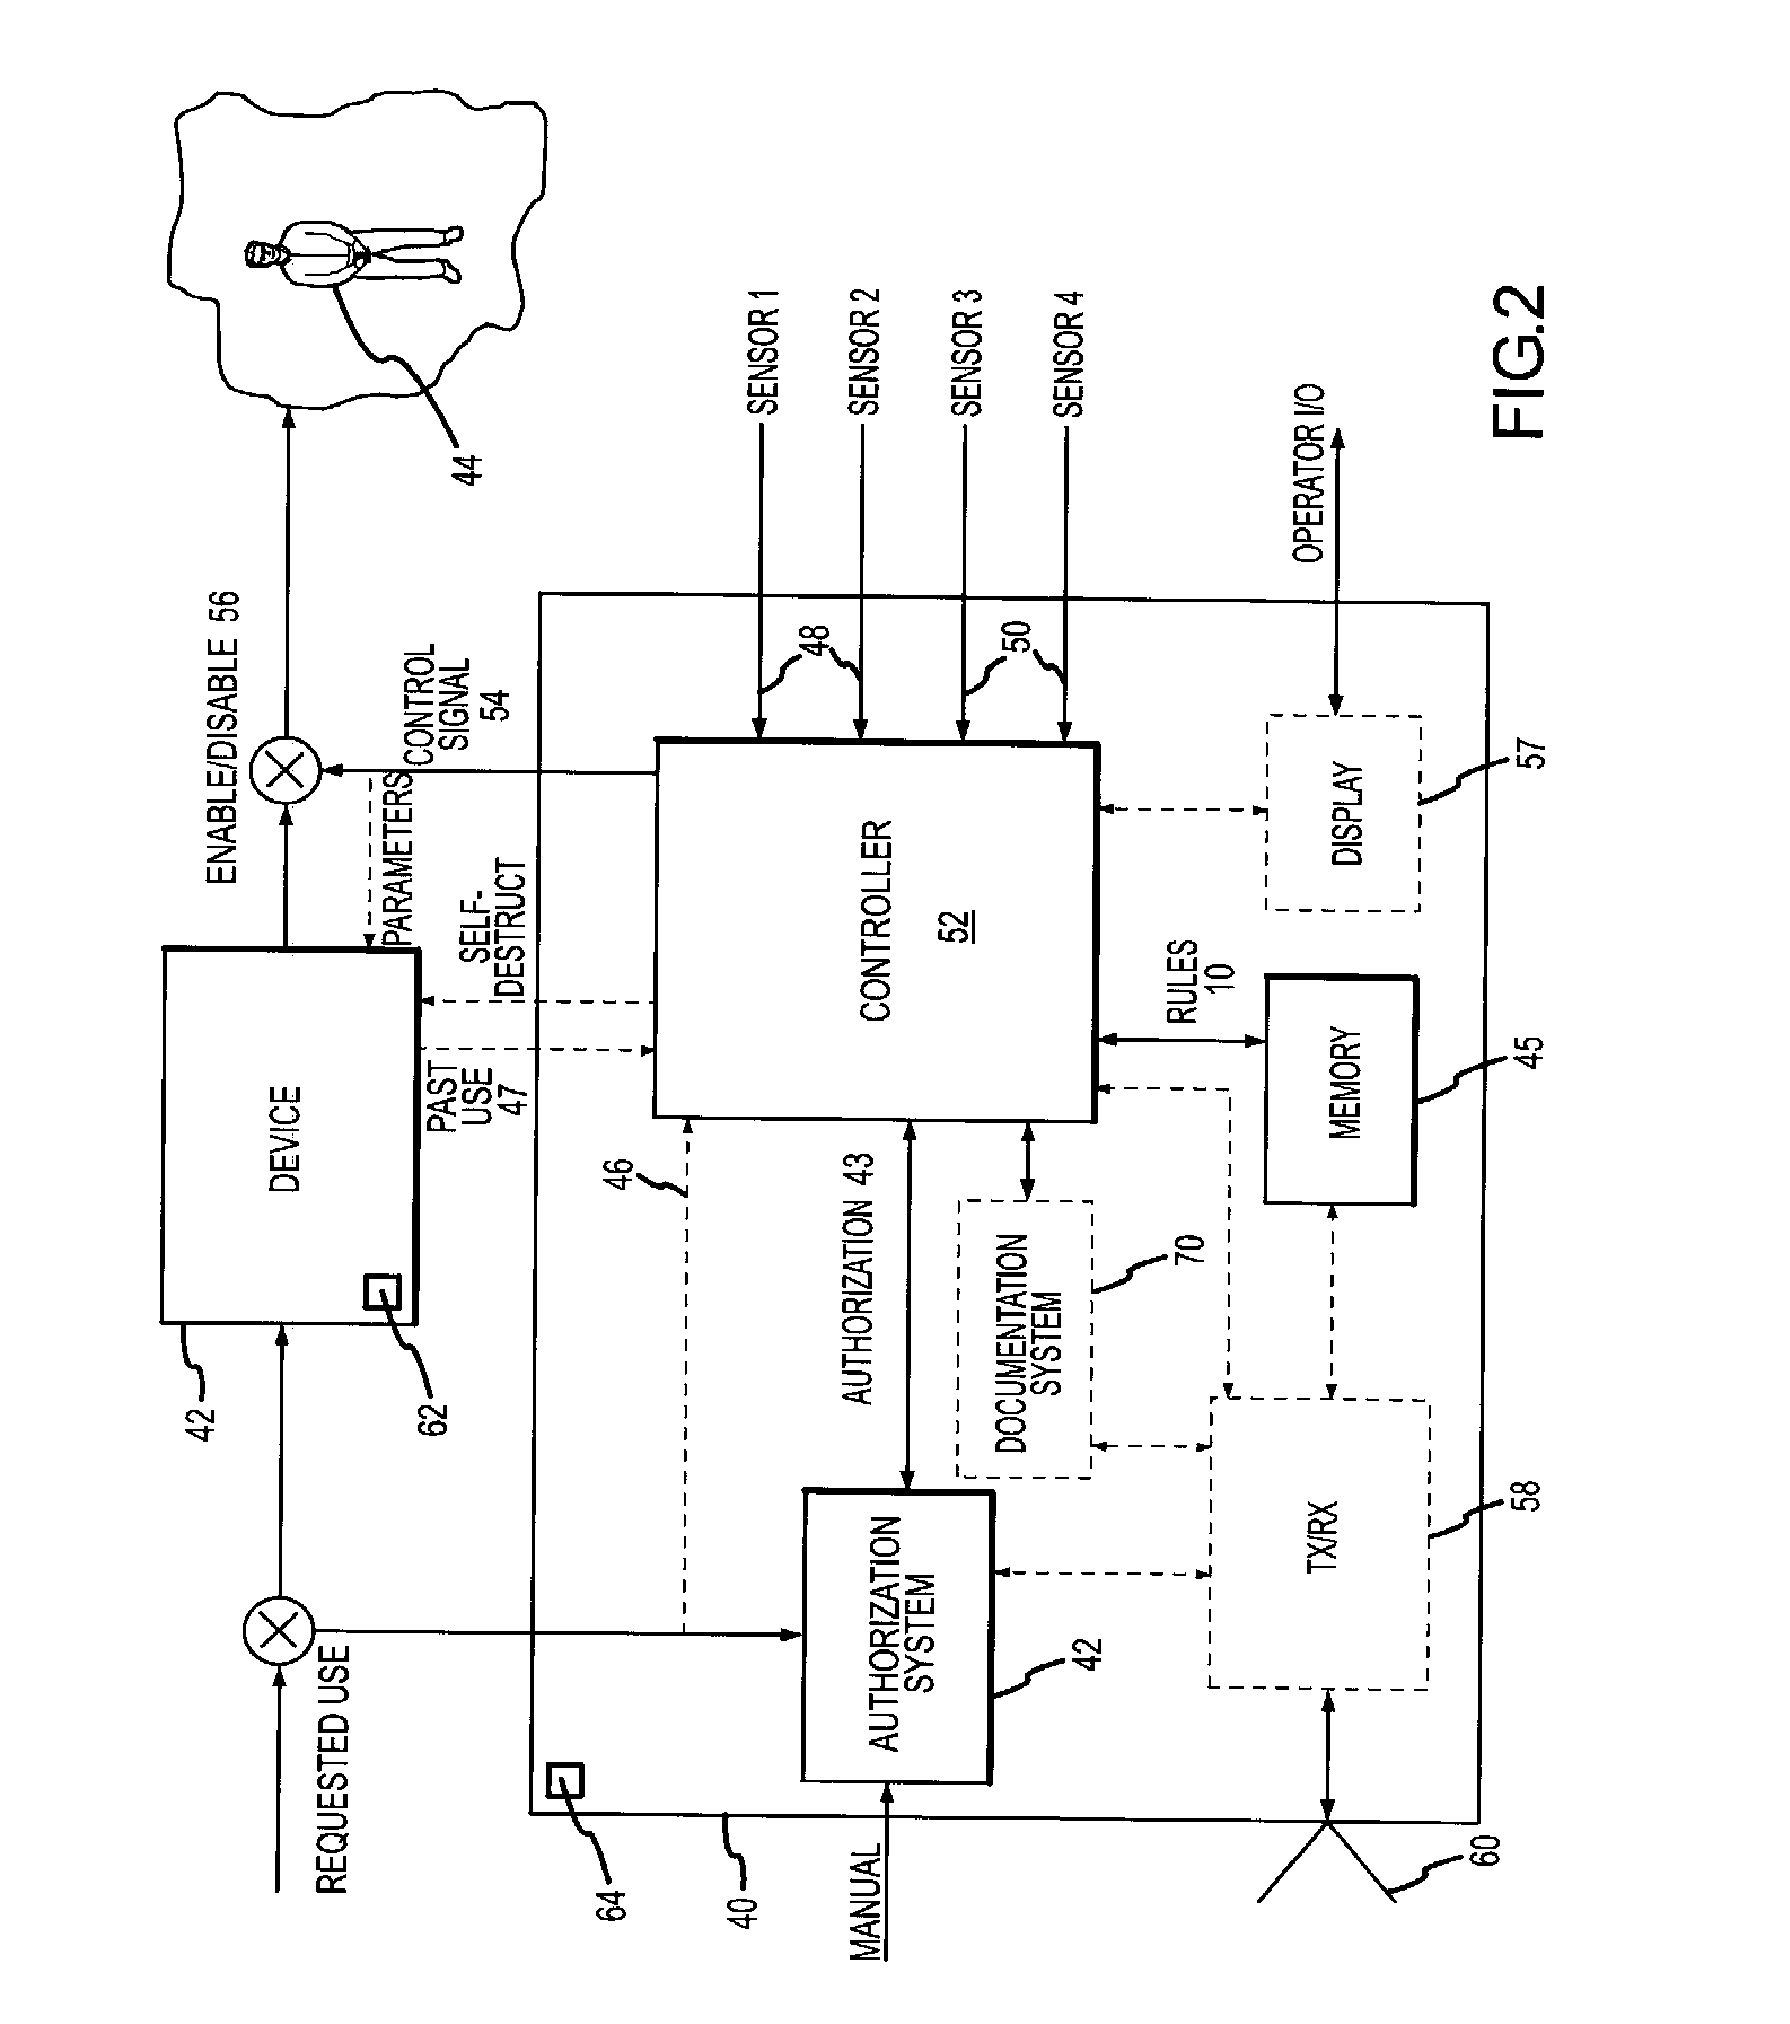 Safeguard System for Ensuring Device Operation in Conformance with Governing Laws